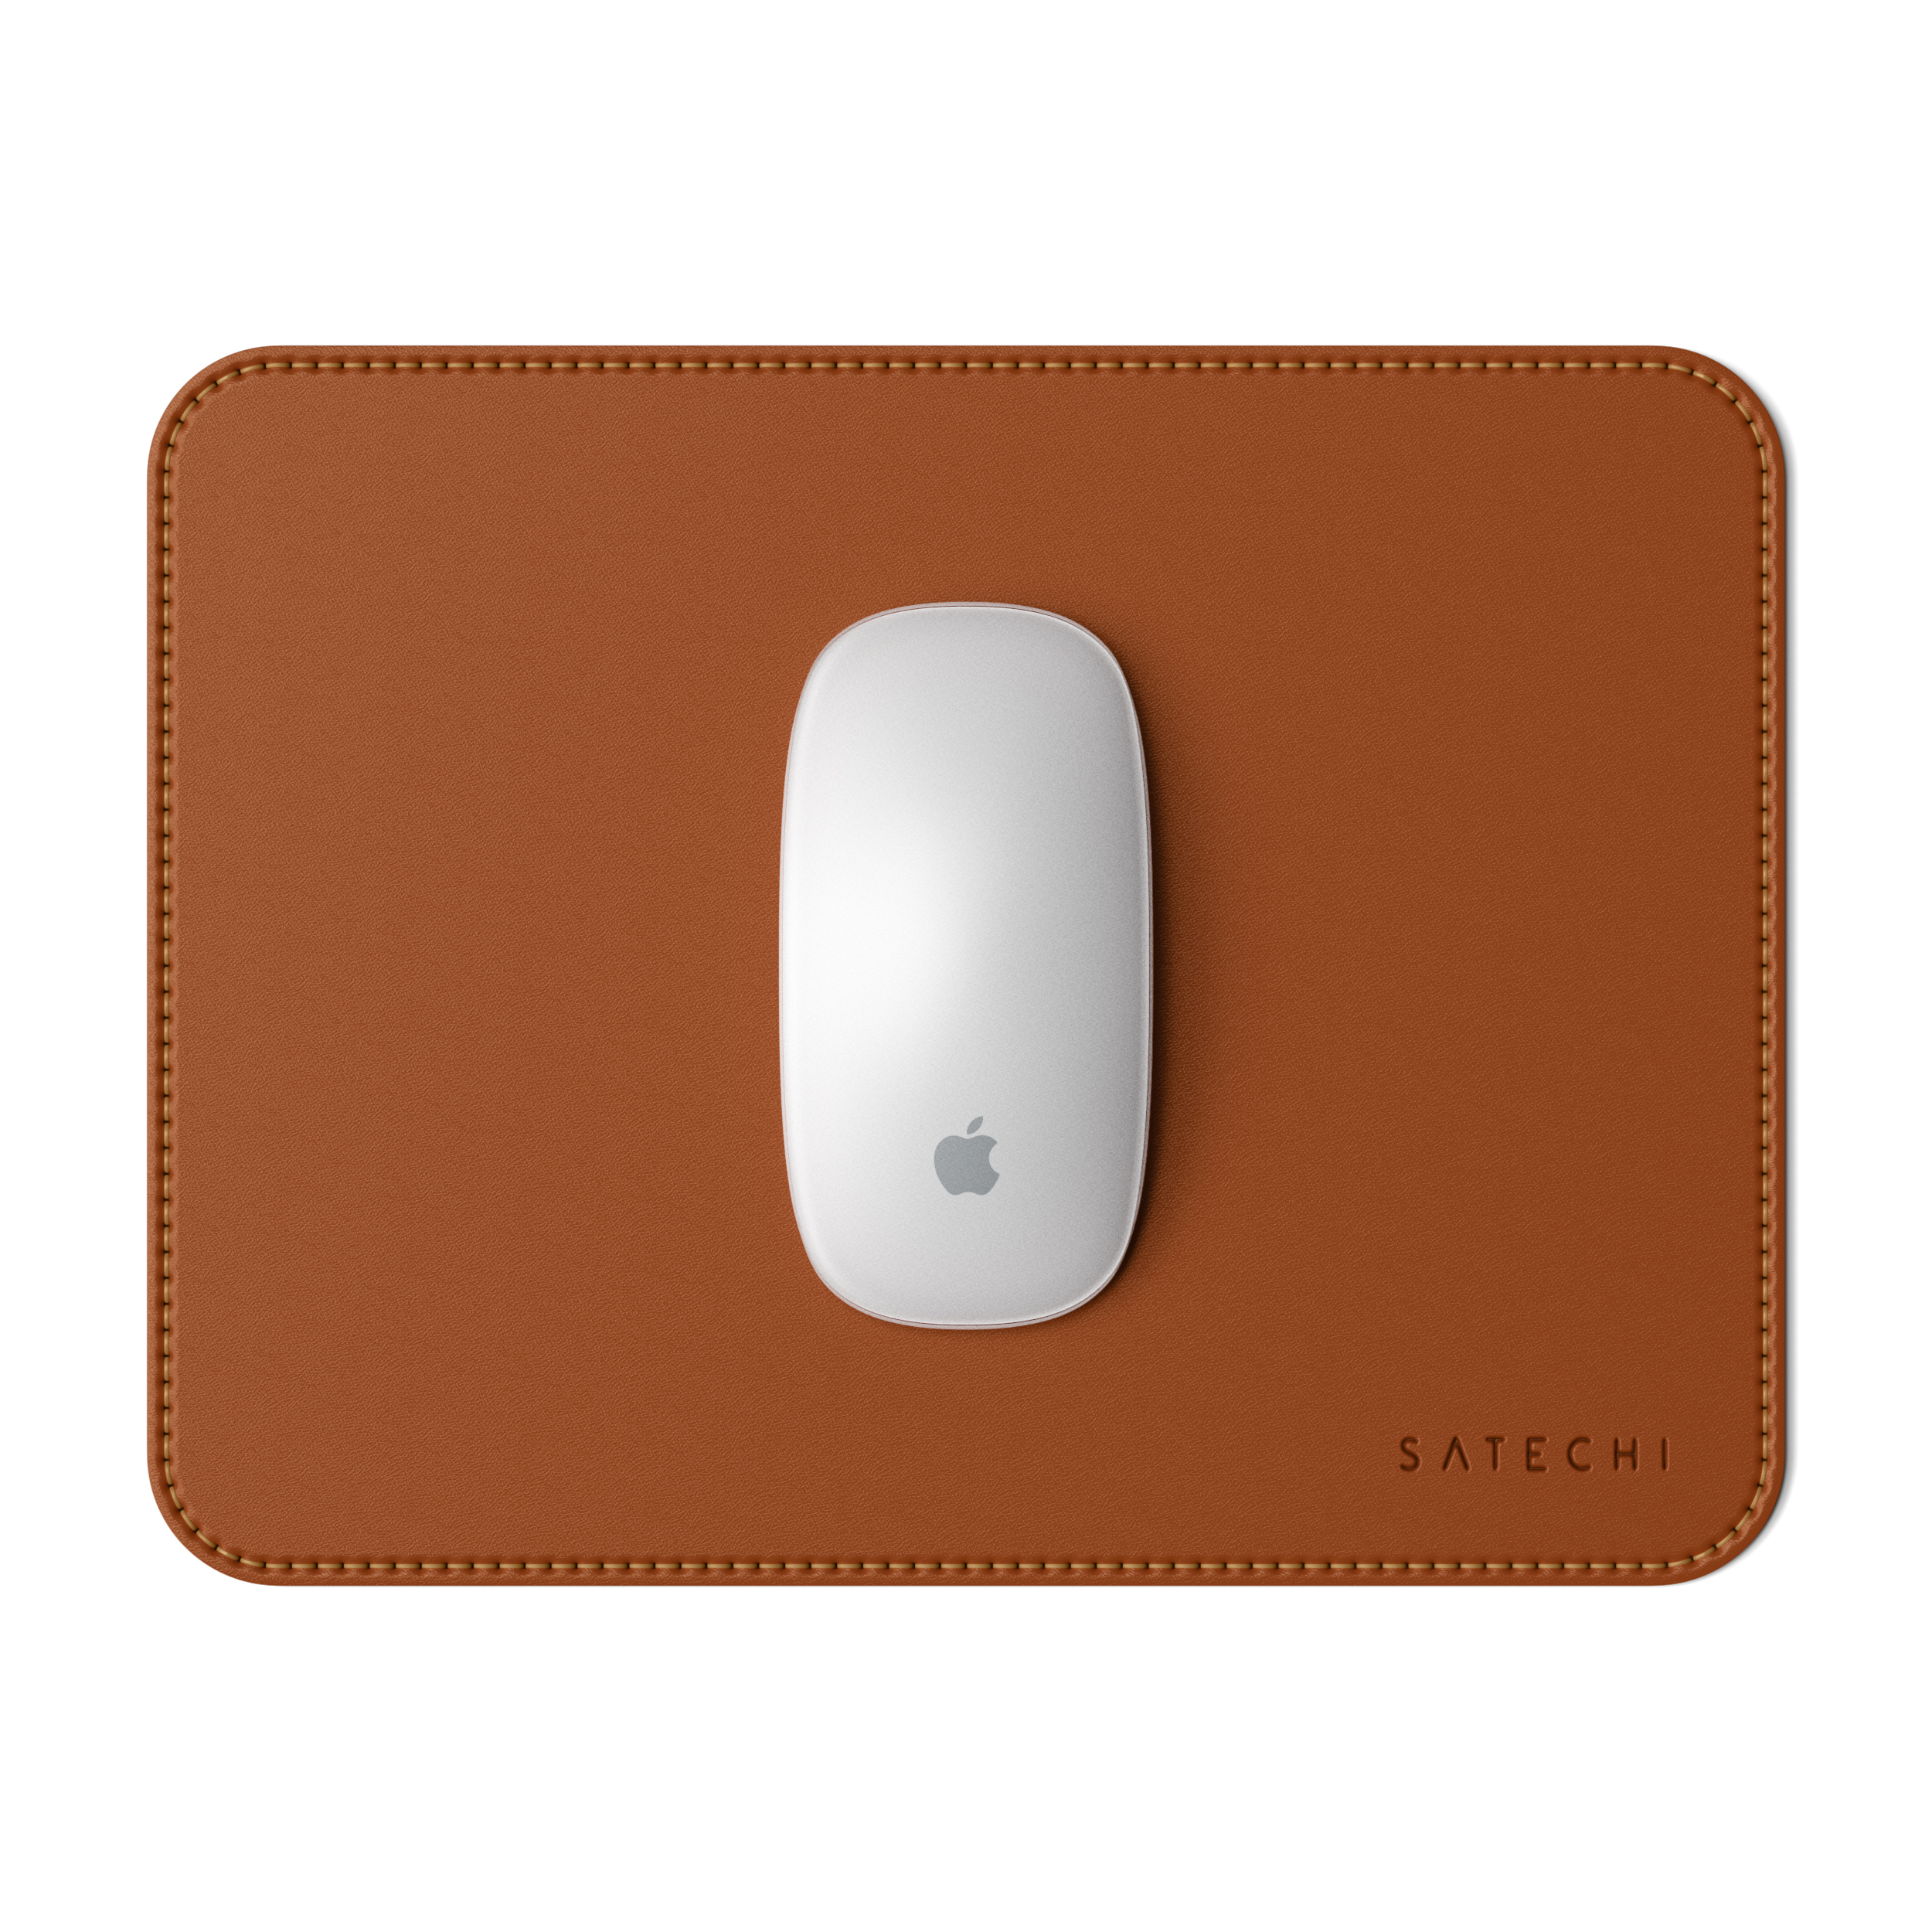 Brown SATECHI Pad 24,89 - Mousepad x Mouse cm) (19 cm Eco-Leather